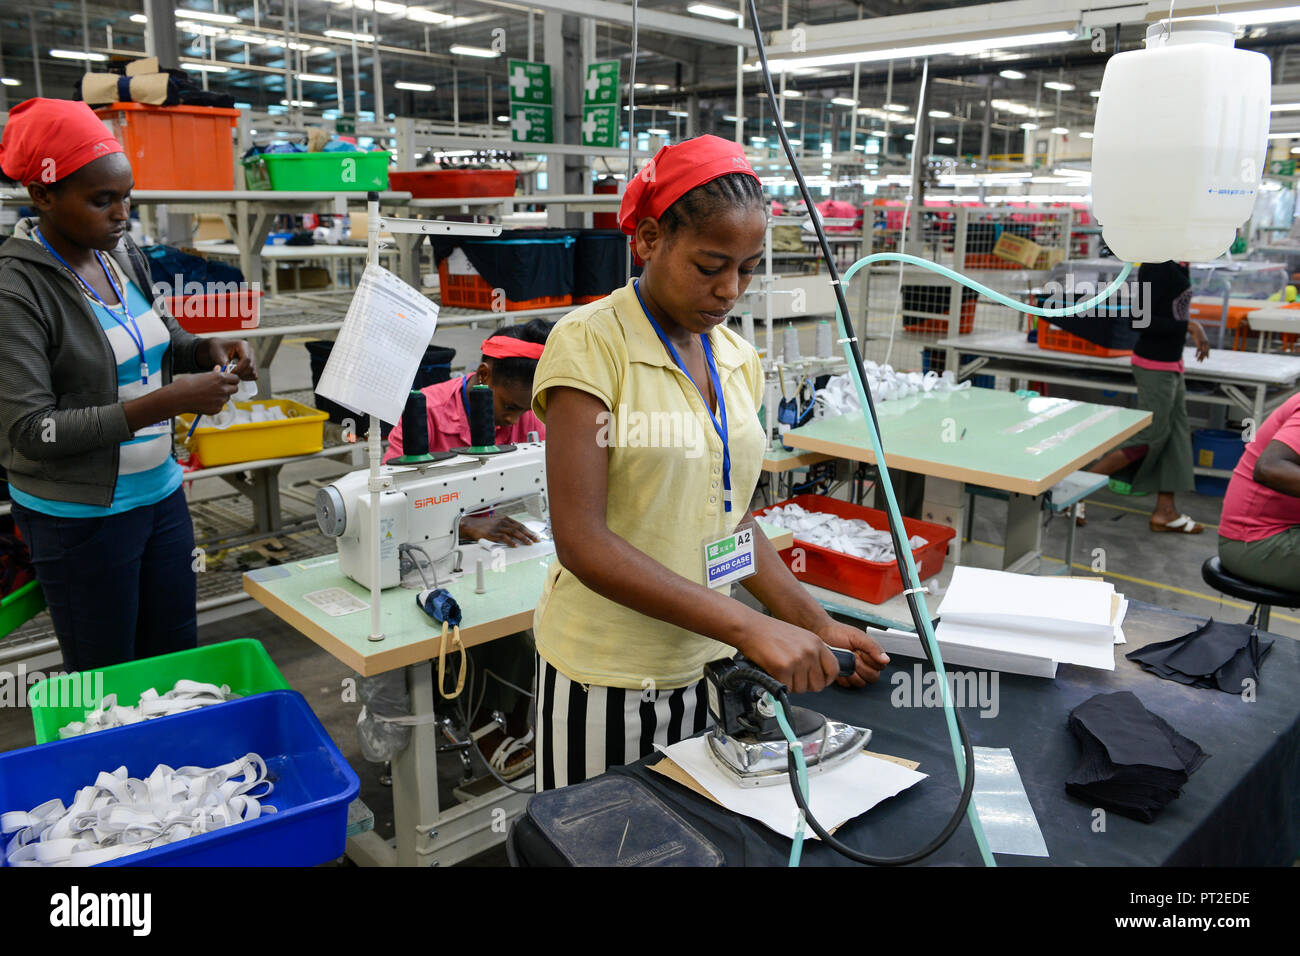 ETHIOPIA , Southern Nations, Hawassa or Awasa, Hawassa Industrial Park, chinese-built for the ethiopian government to attract foreign investors with low rent and tax free to establish a textile industry and create thousands of new jobs, taiwanese company Everest Textile Co. Ltd.produces textiles from synthetic fabric for export, woman ironing cloth pieces with iron Stock Photo